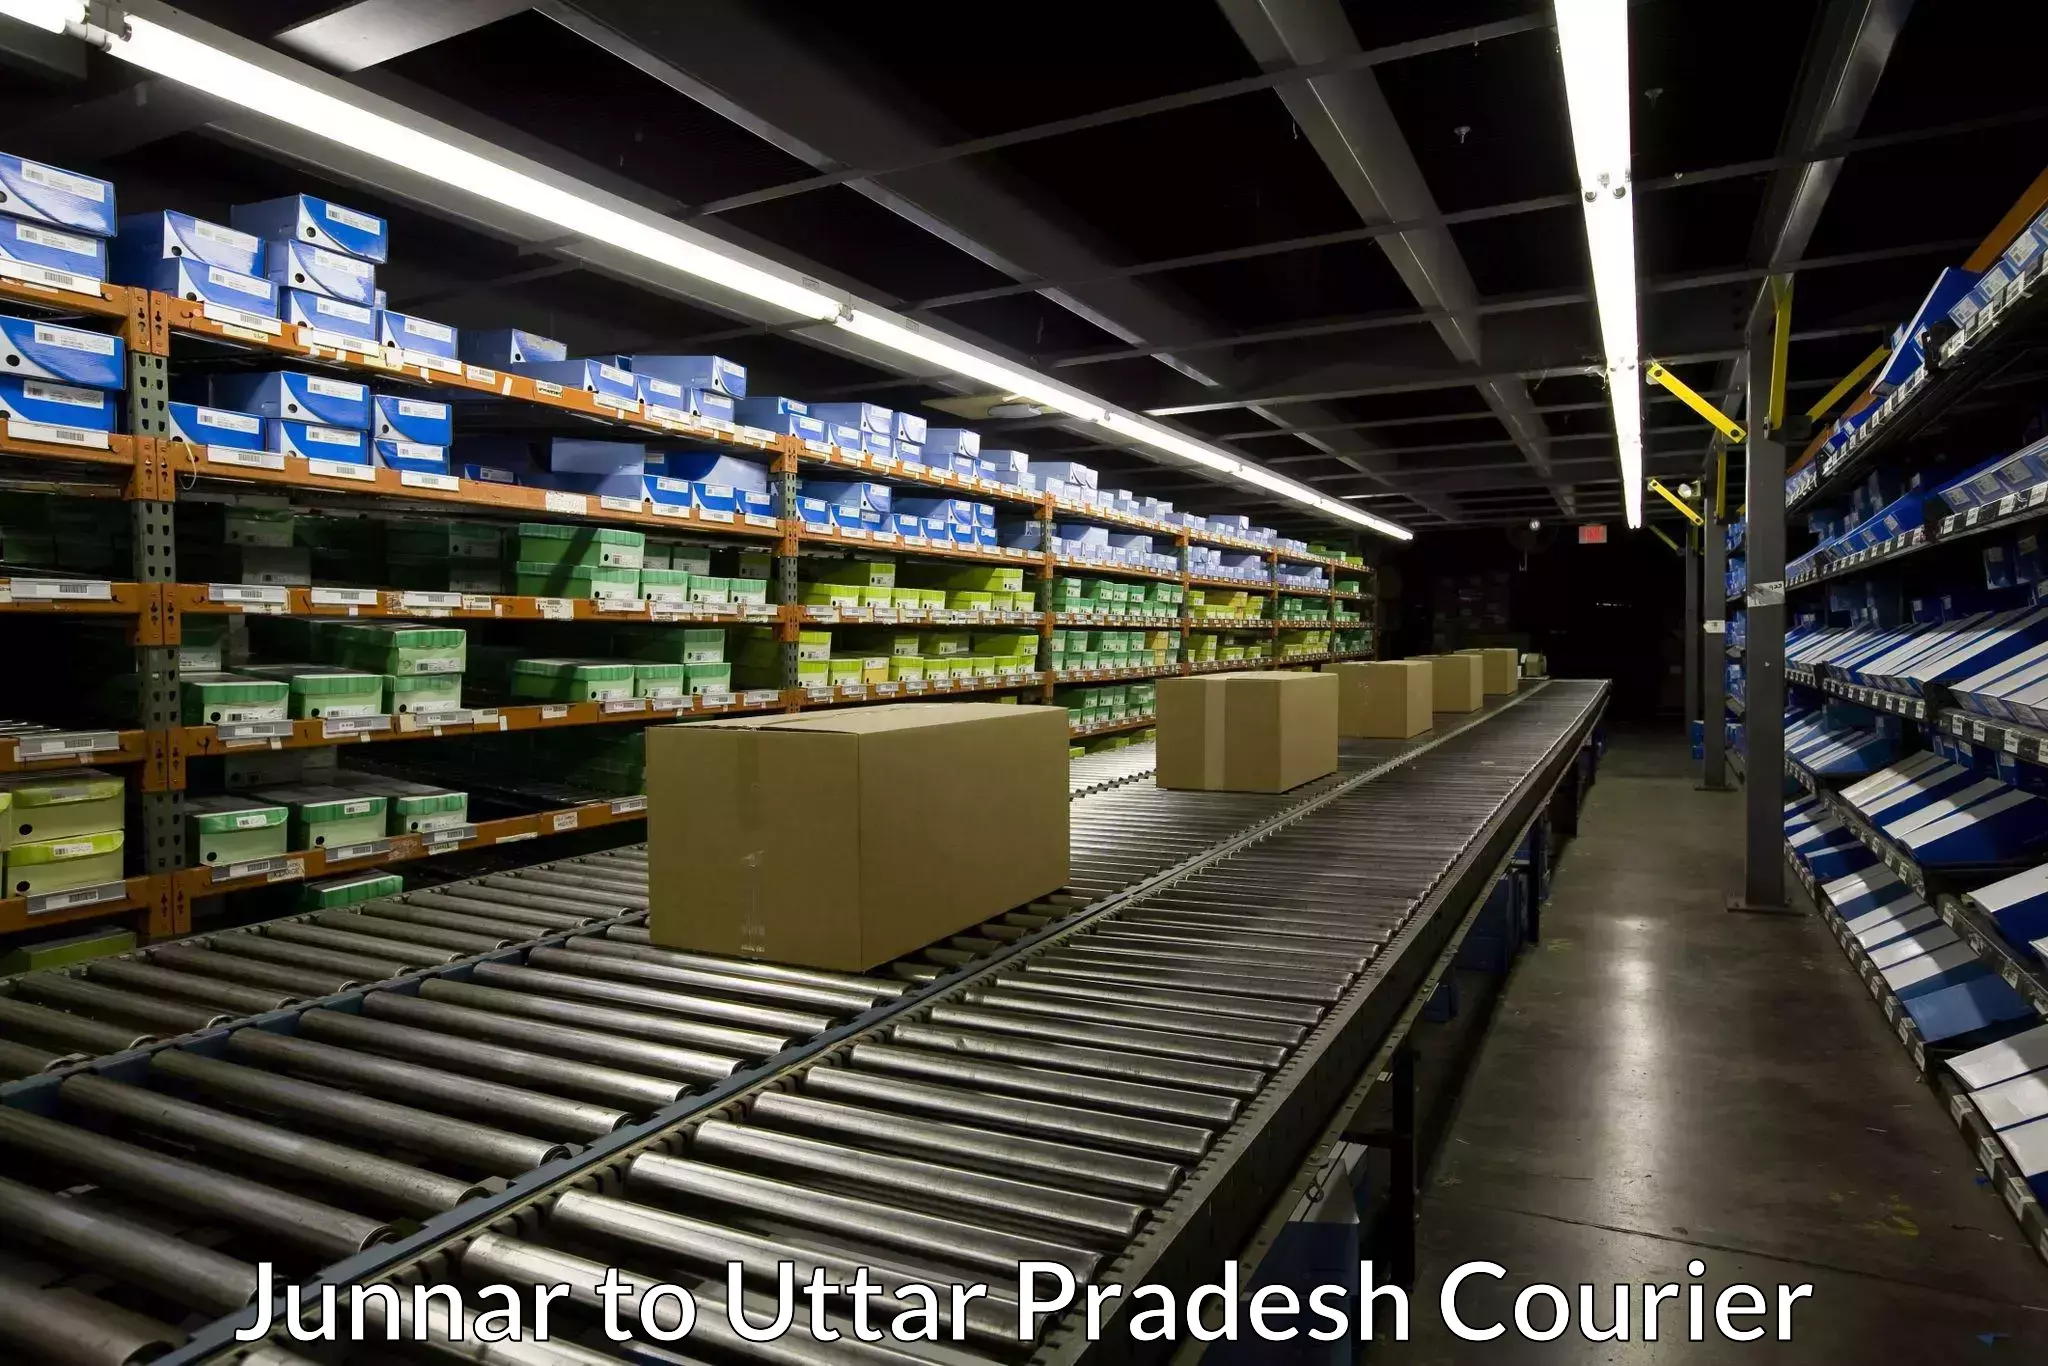 State-of-the-art courier technology Junnar to Varanasi